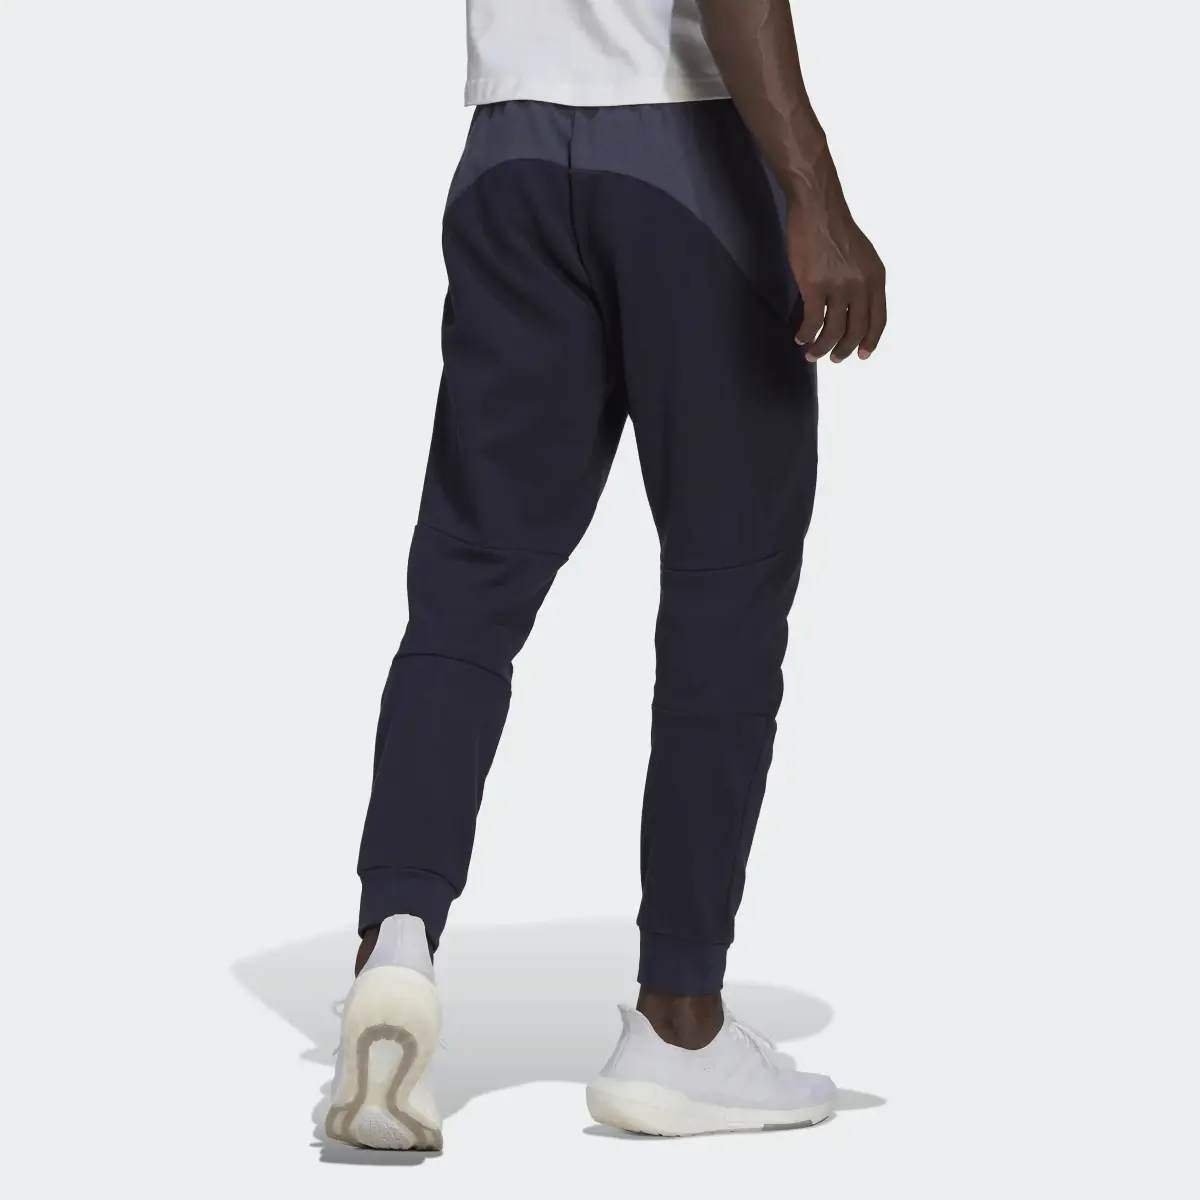 Adidas Designed for Gameday Joggers. 2